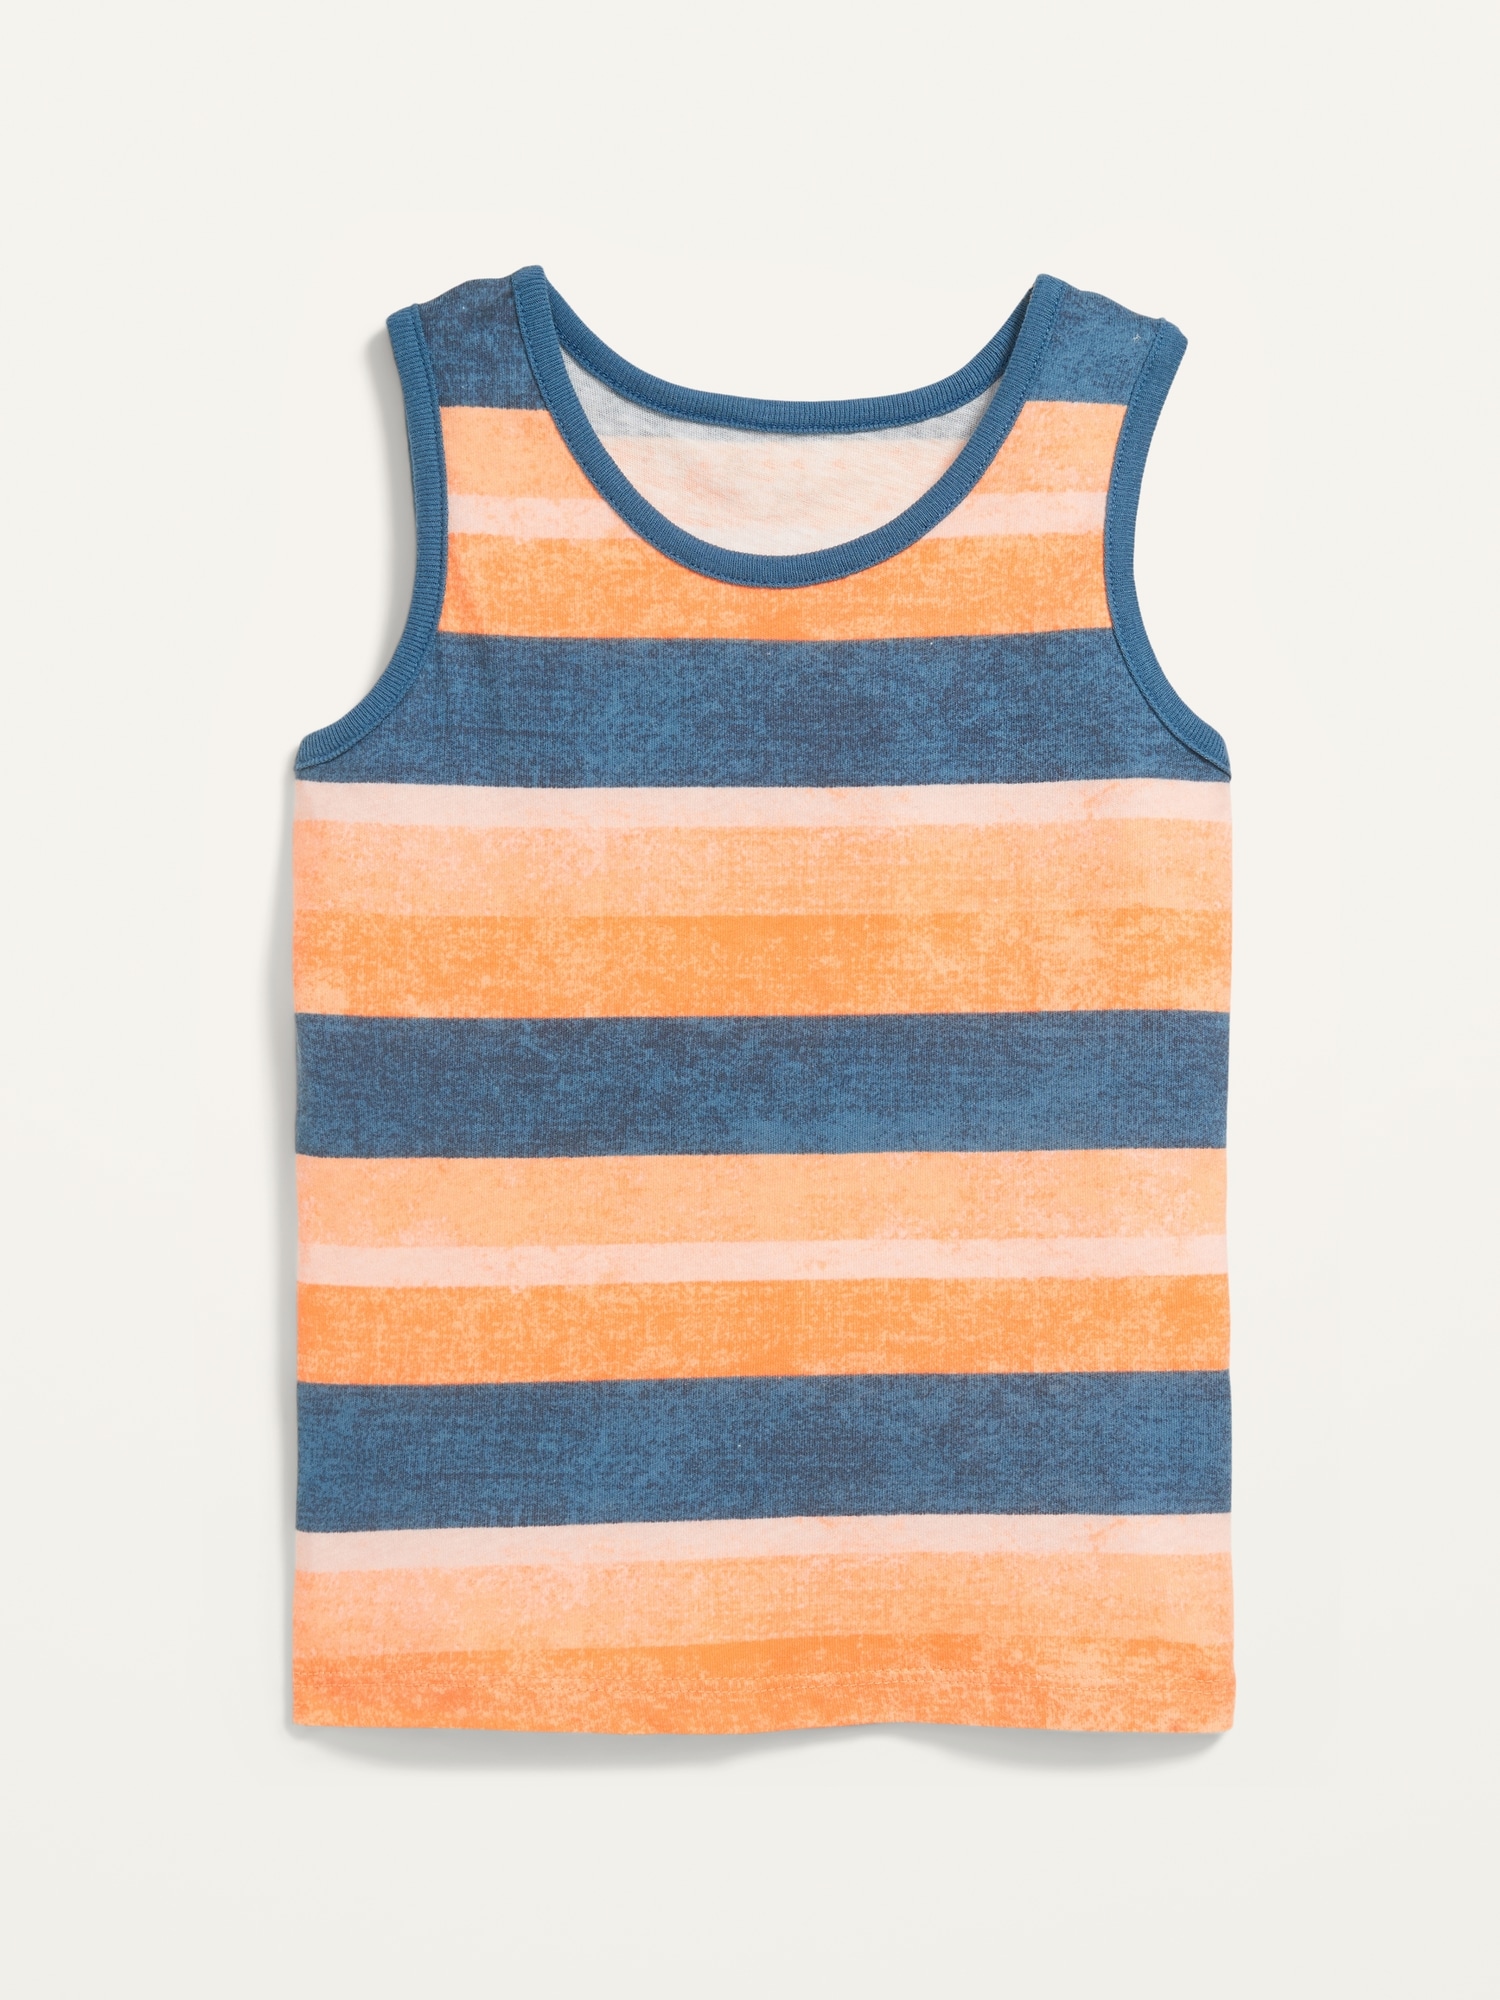 Unisex Tank Top for Toddlers